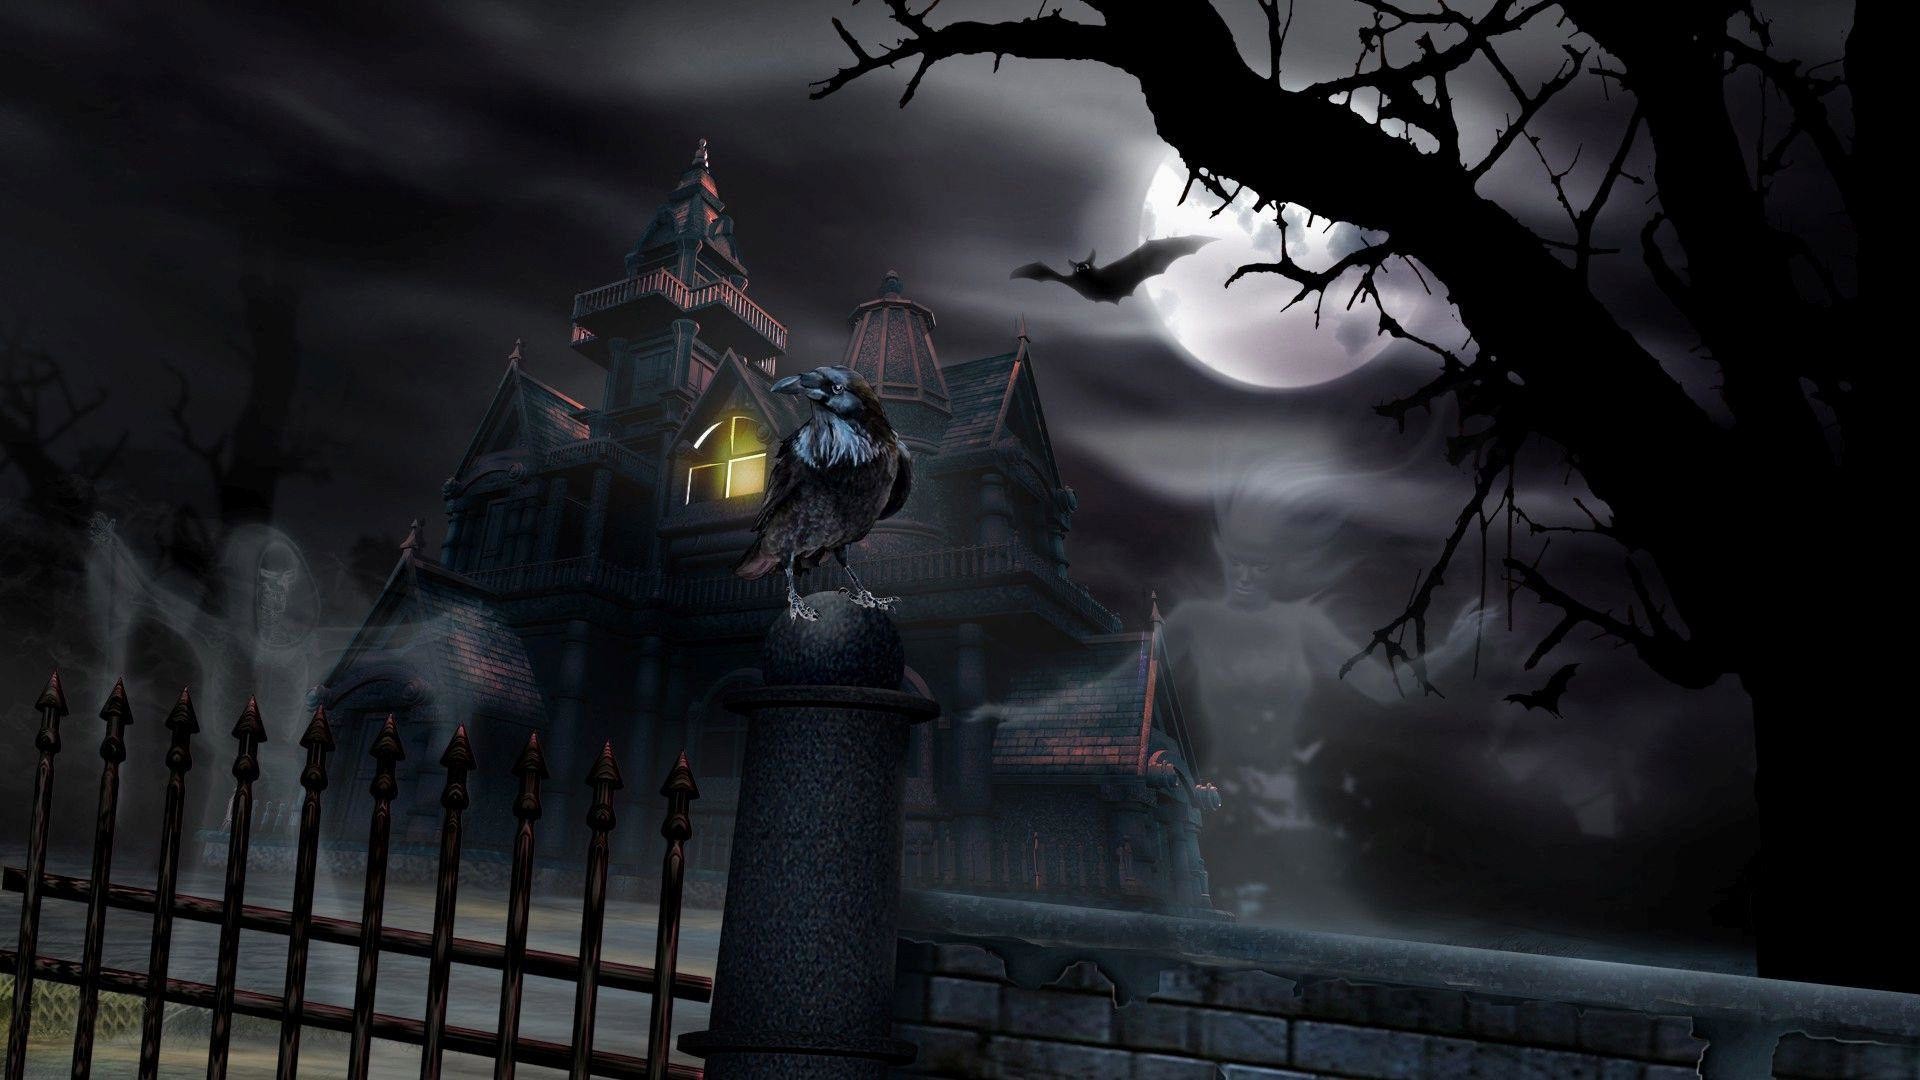 Haunted House Live Download Haunted House Live wallpaper